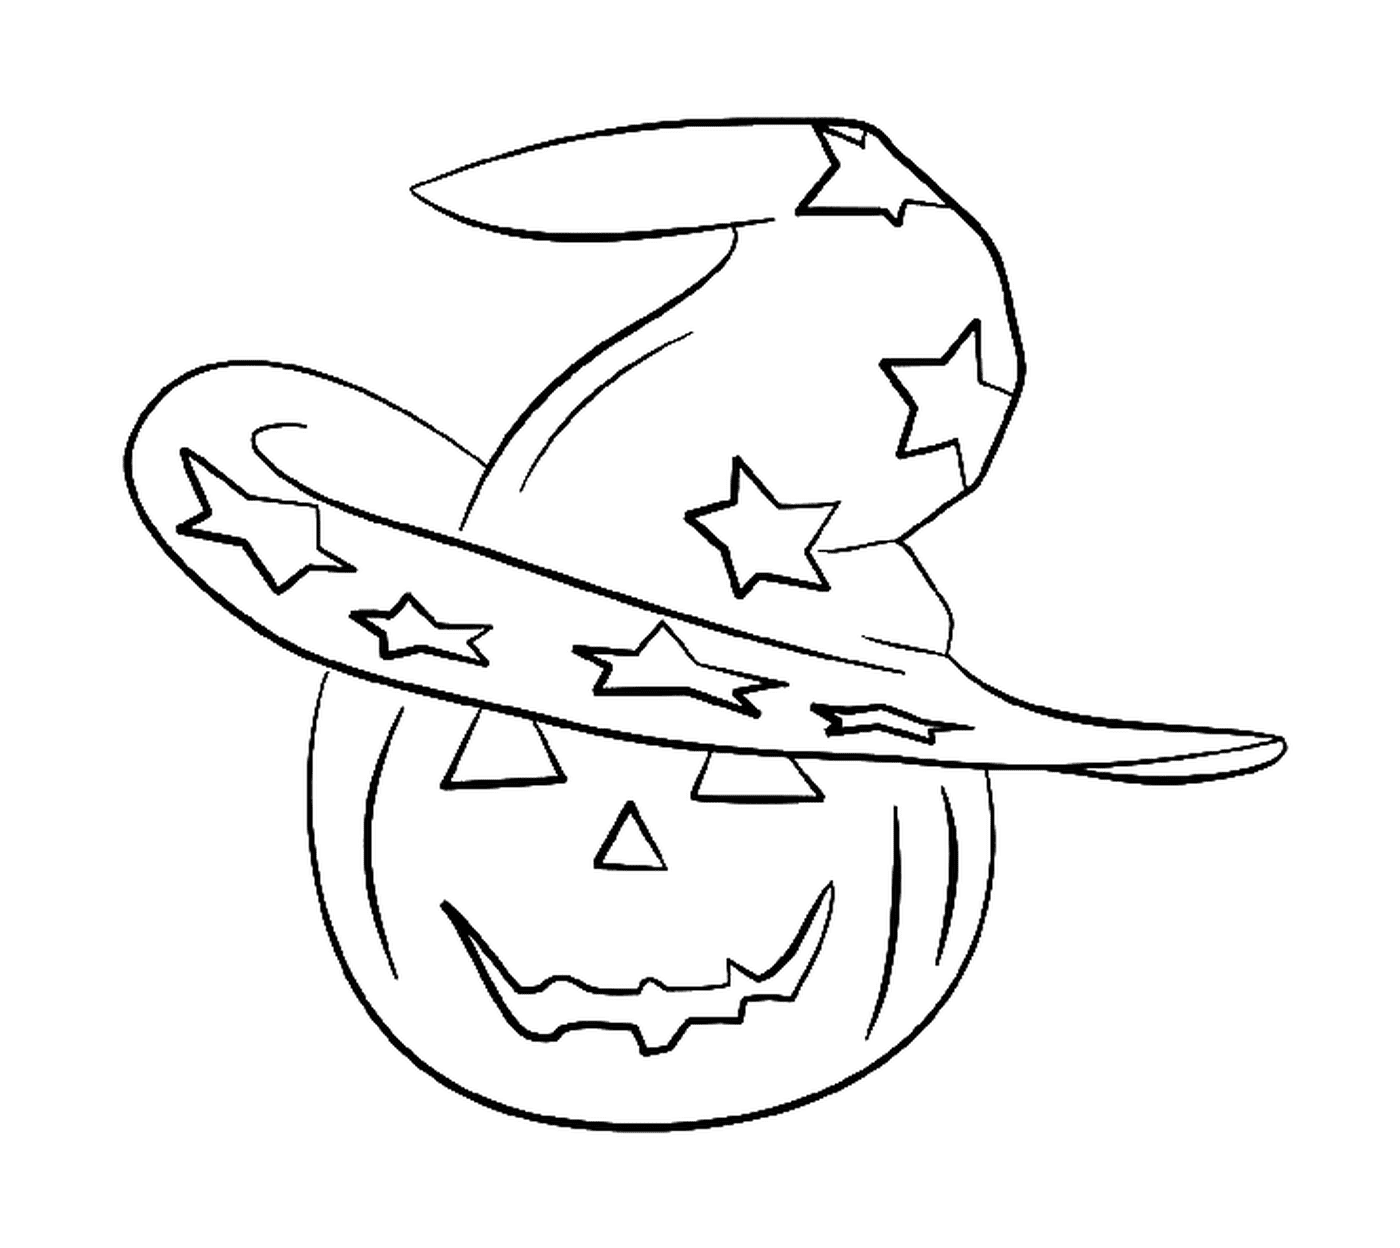  Pumpkin with a witch hat 